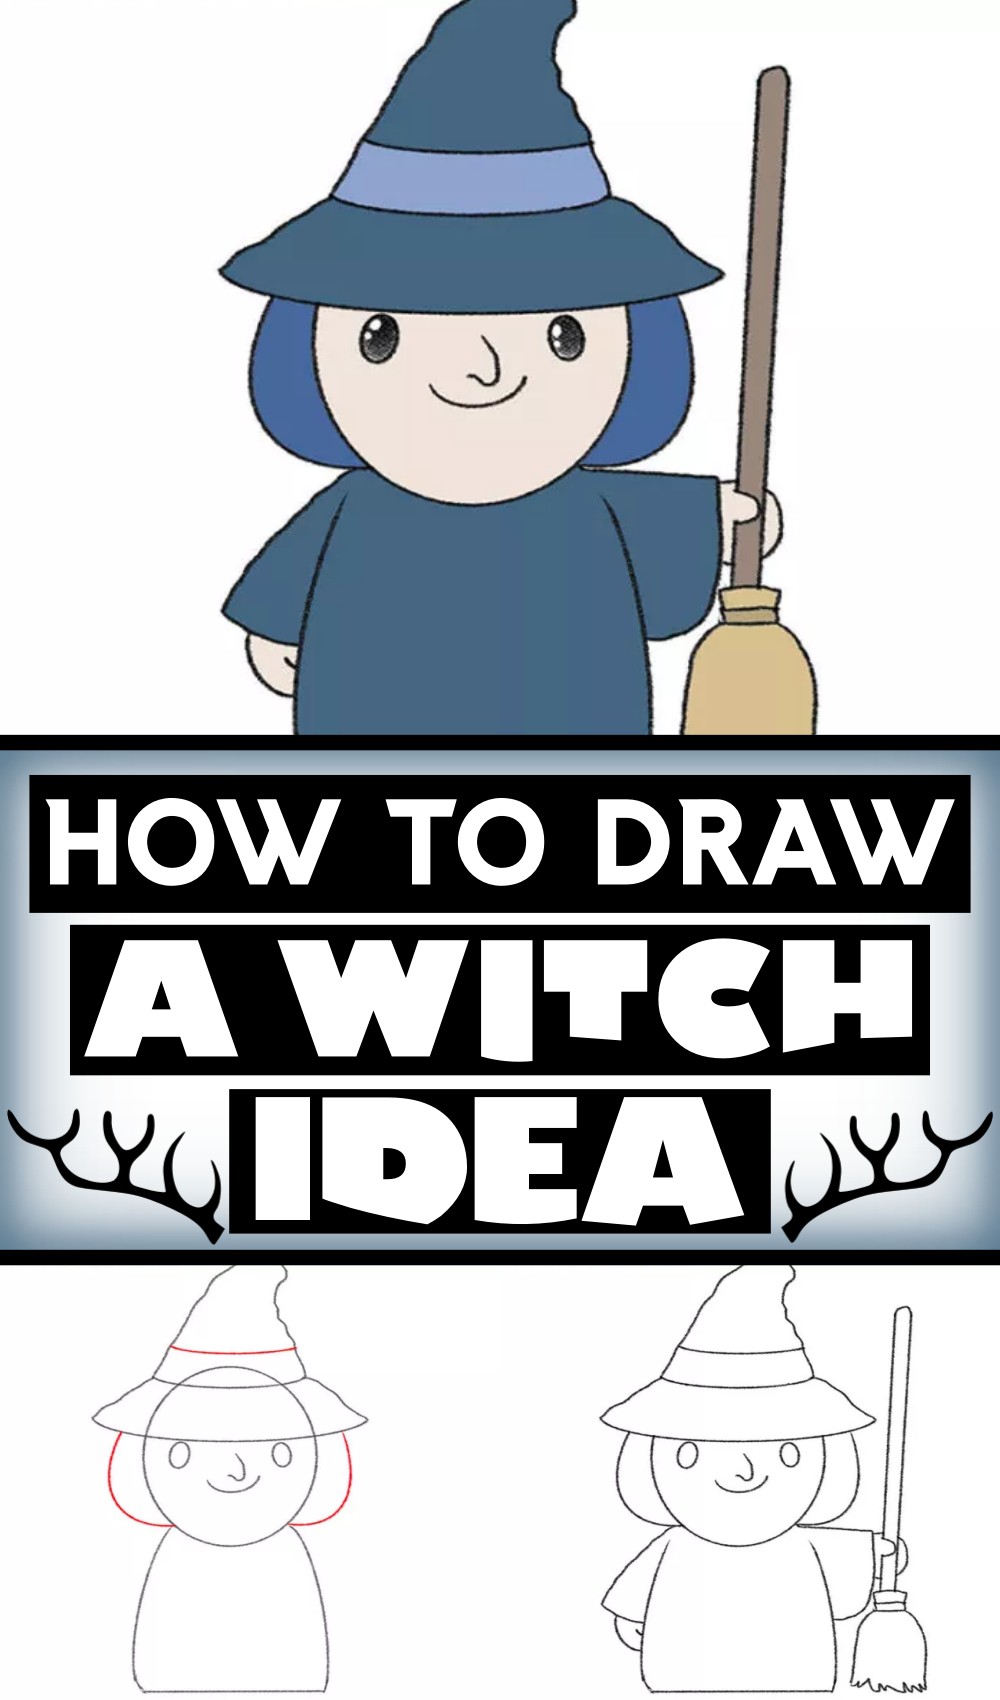 How To Draw A Witch